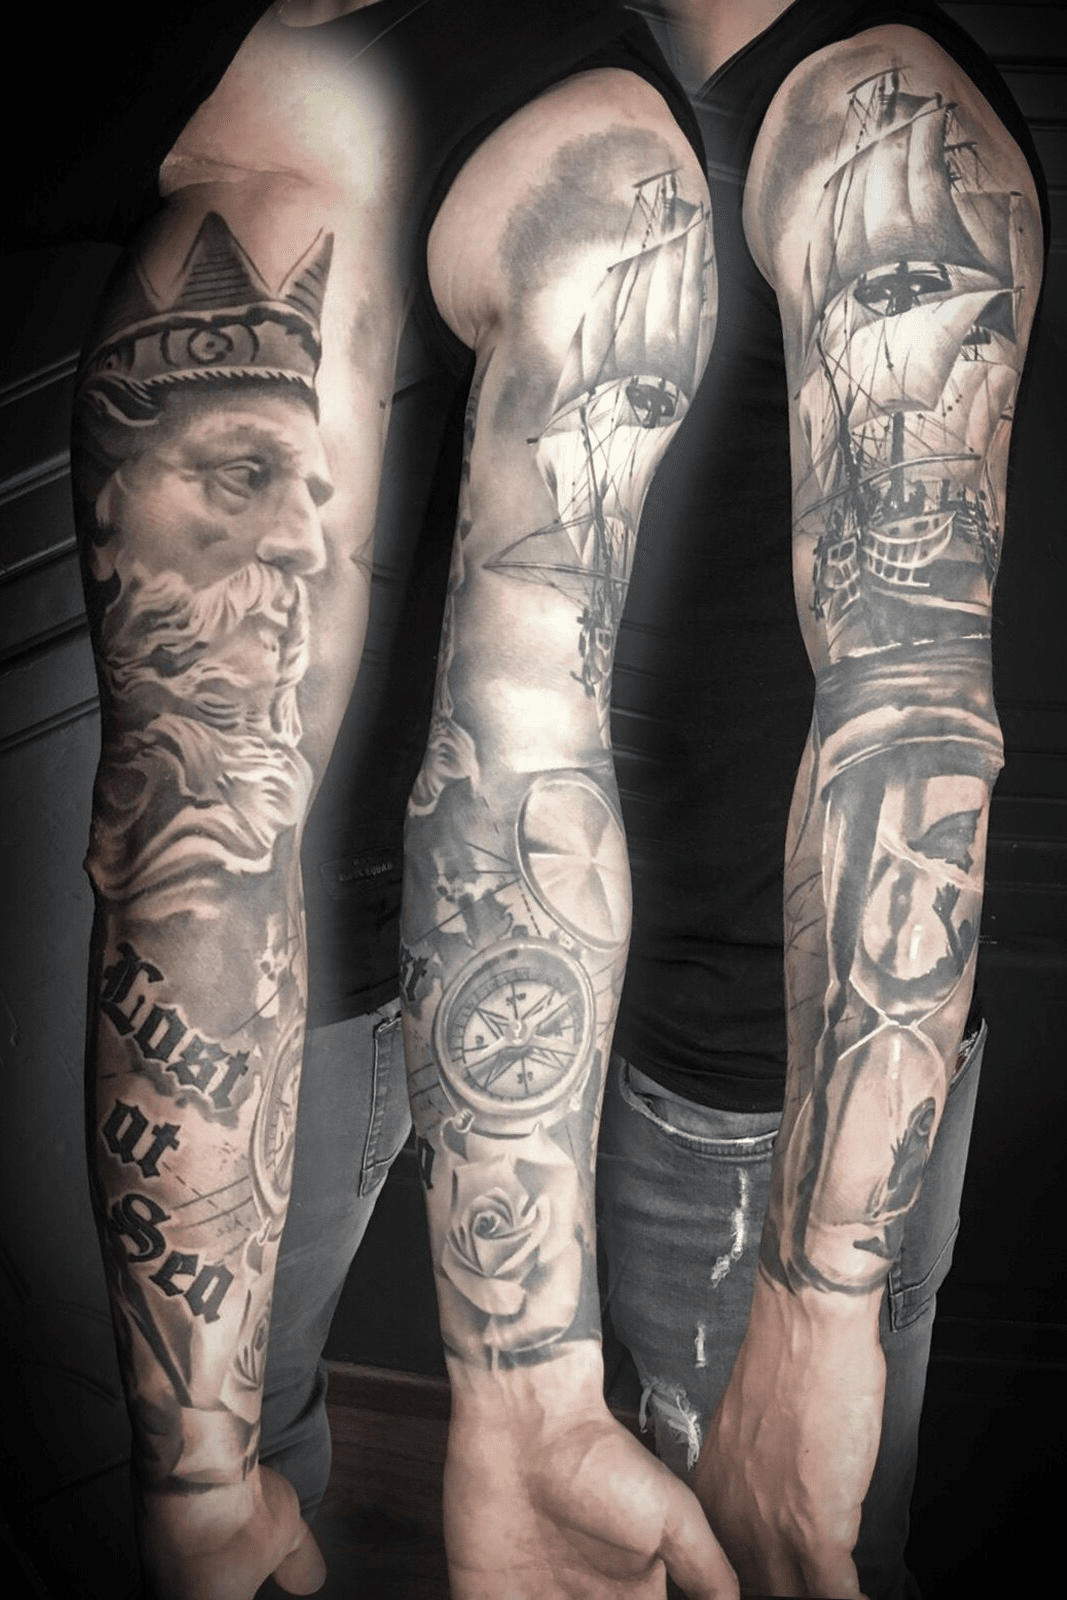 365 Days of Horror  shadowpriest This tattoo sleeve is